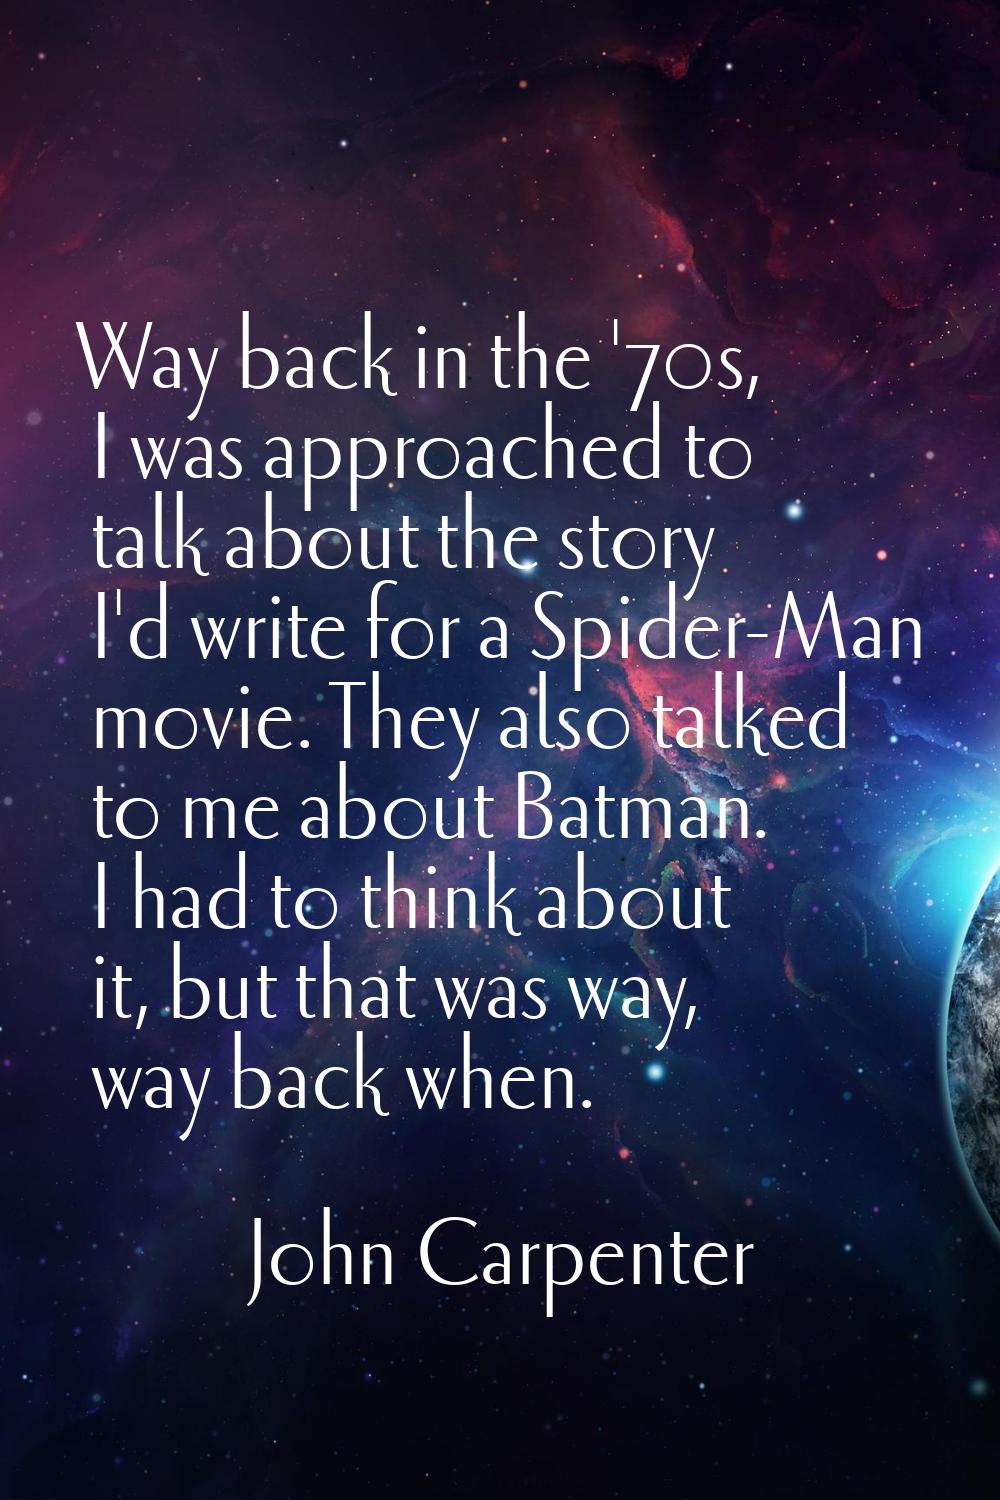 Way back in the '70s, I was approached to talk about the story I'd write for a Spider-Man movie. Th